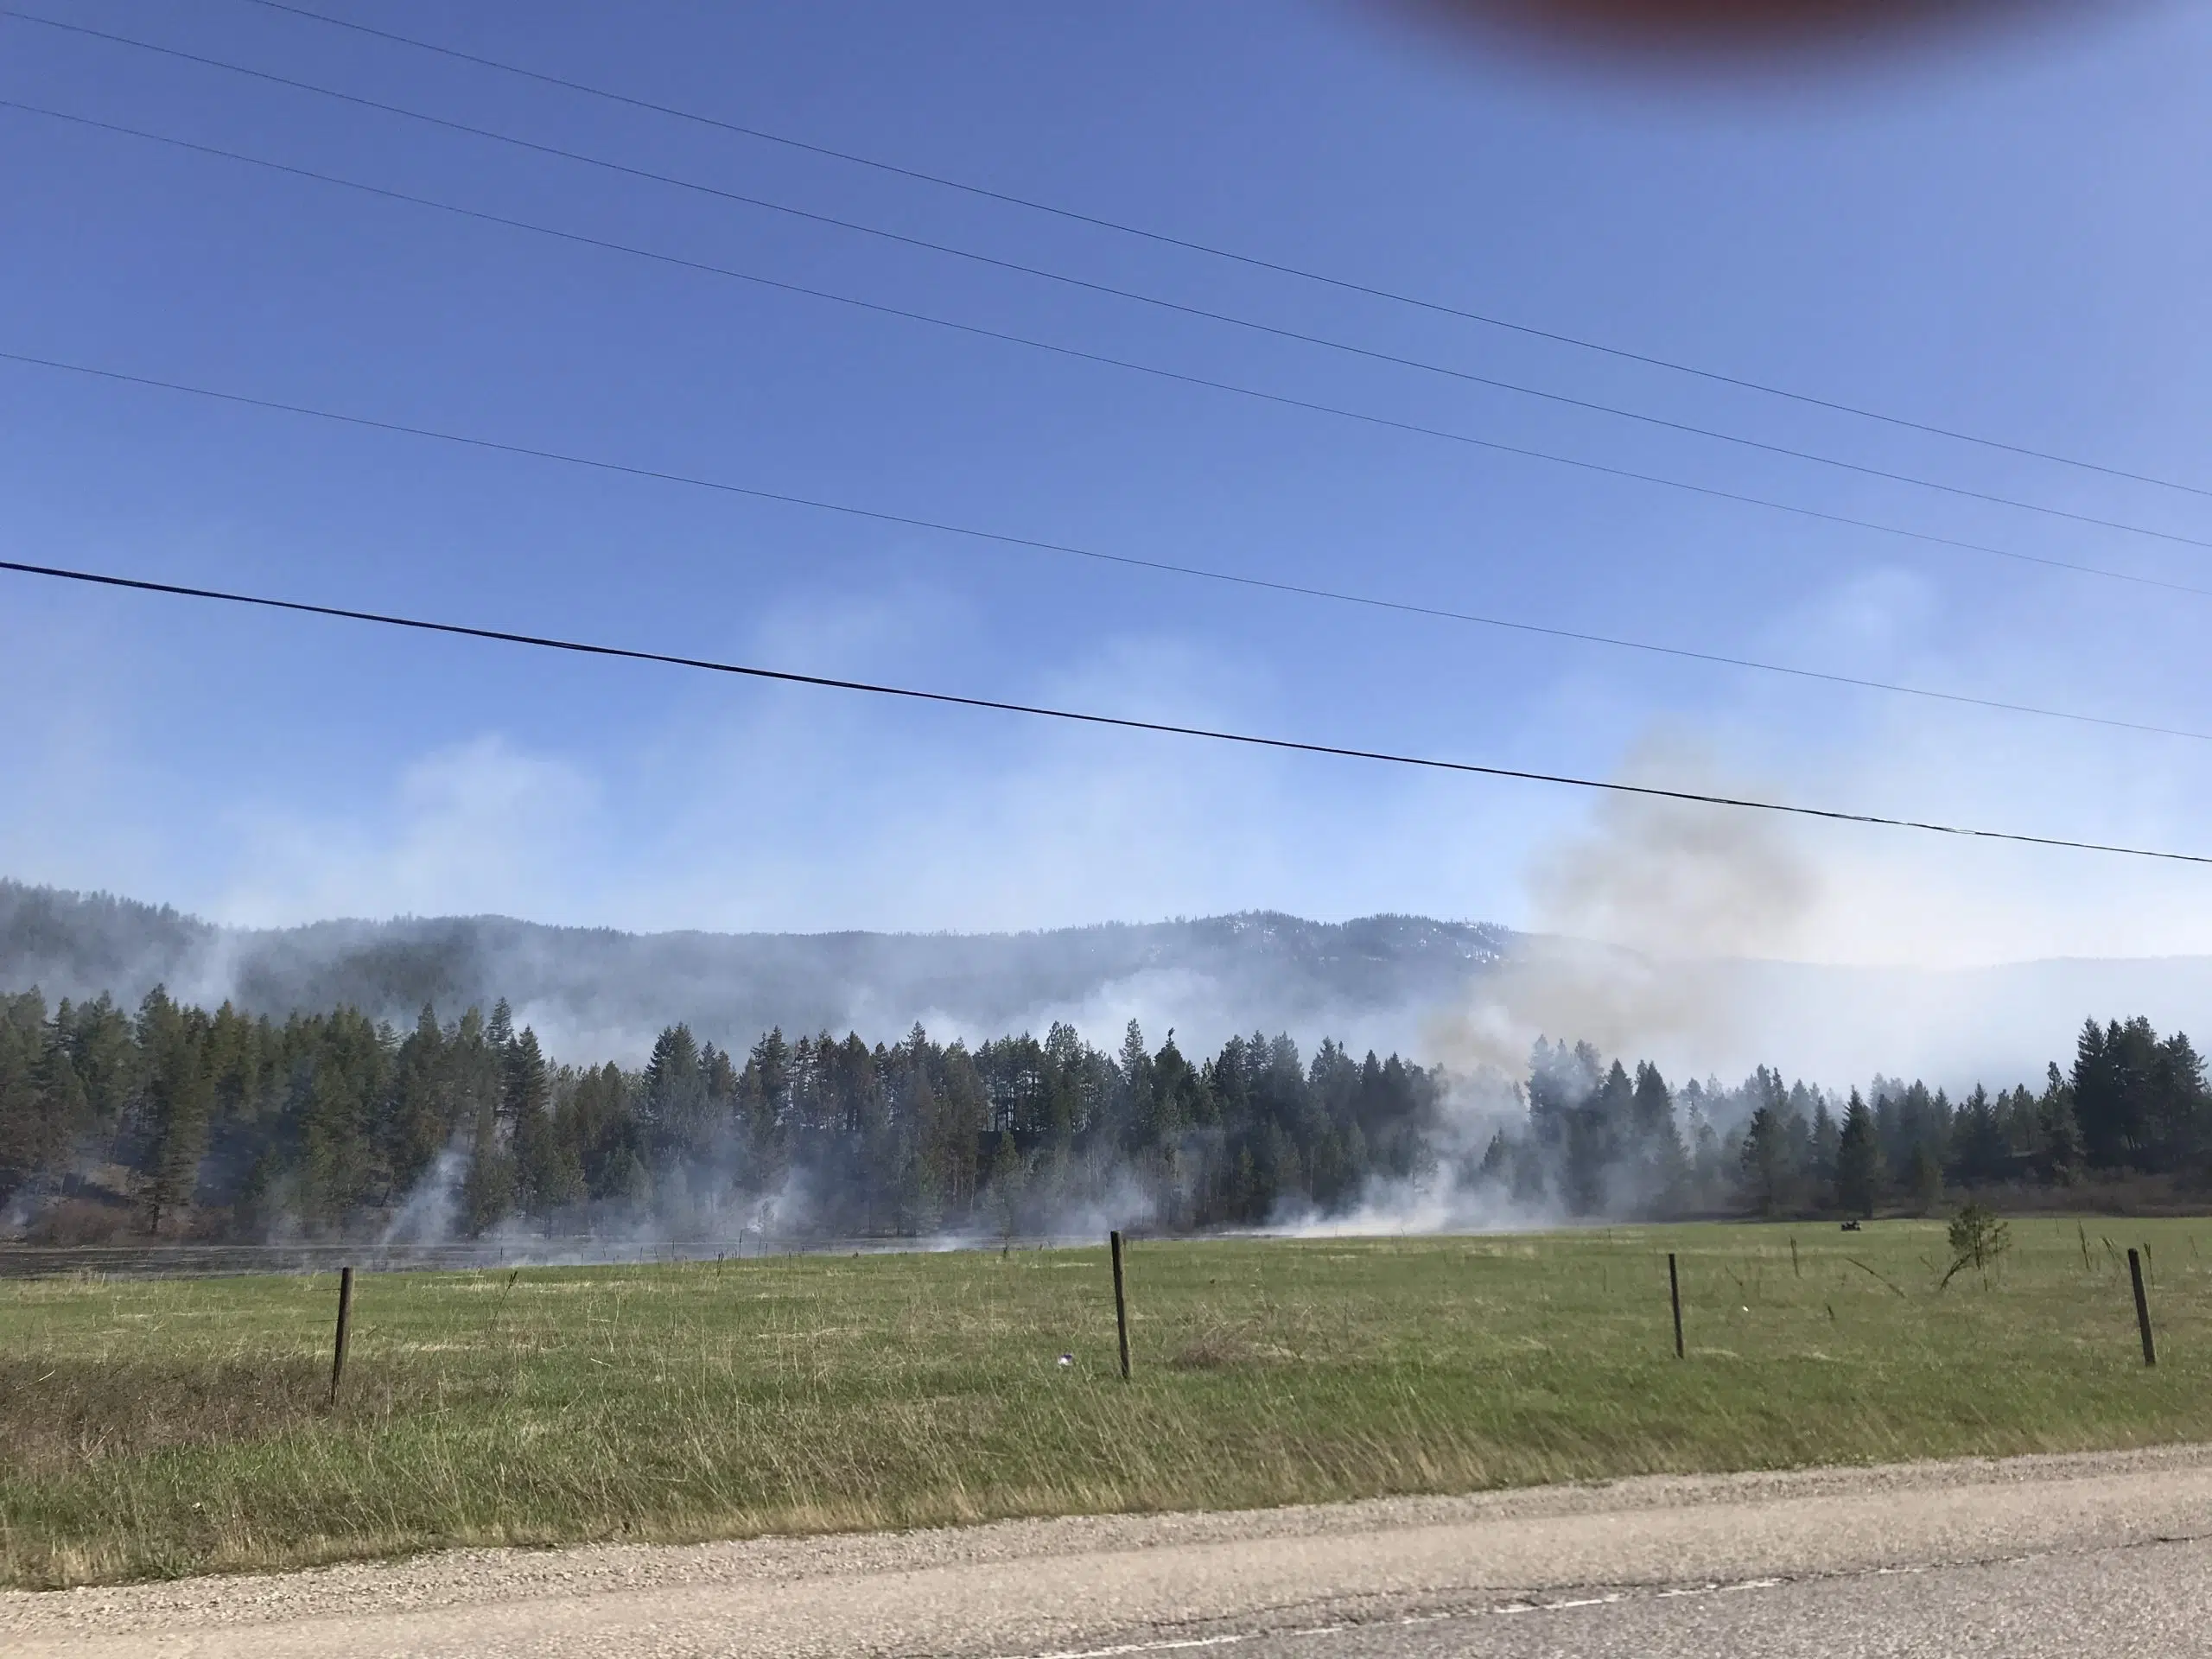 Update: No overnight growth of wildfire near Chase